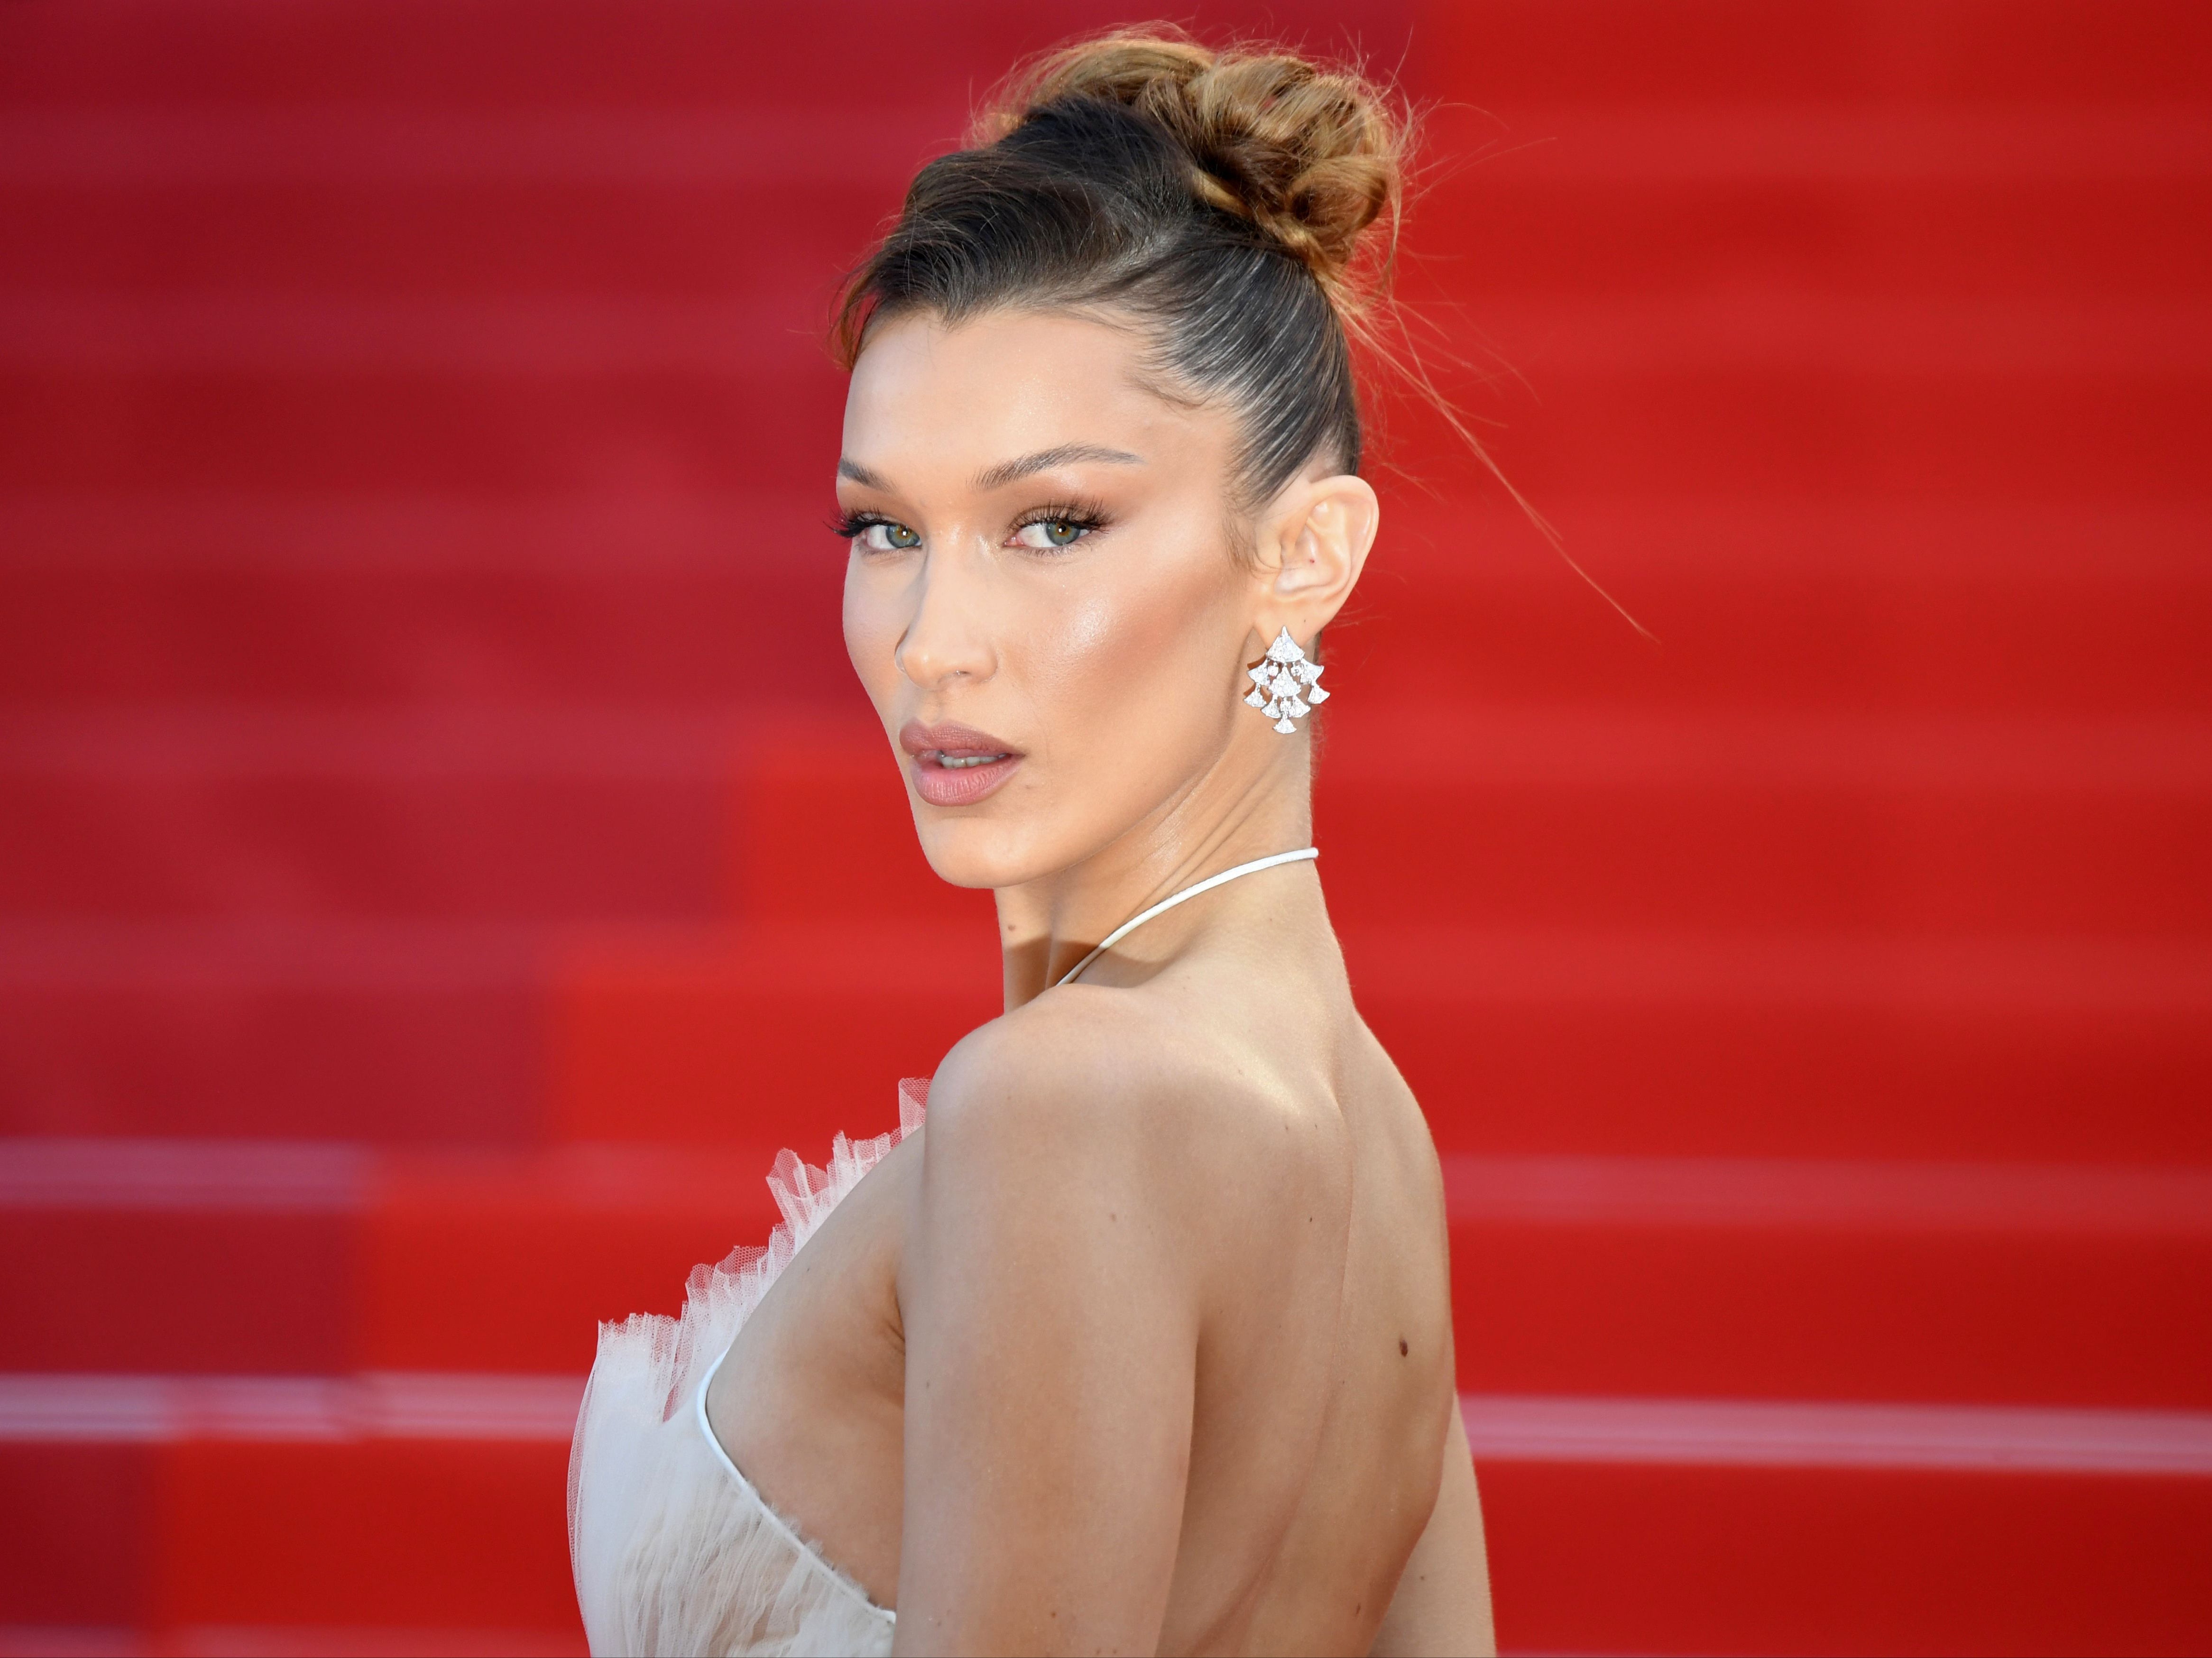 Bella Hadid Shares Photos From Week Before She Received Mental Health Treatment ‘smiling